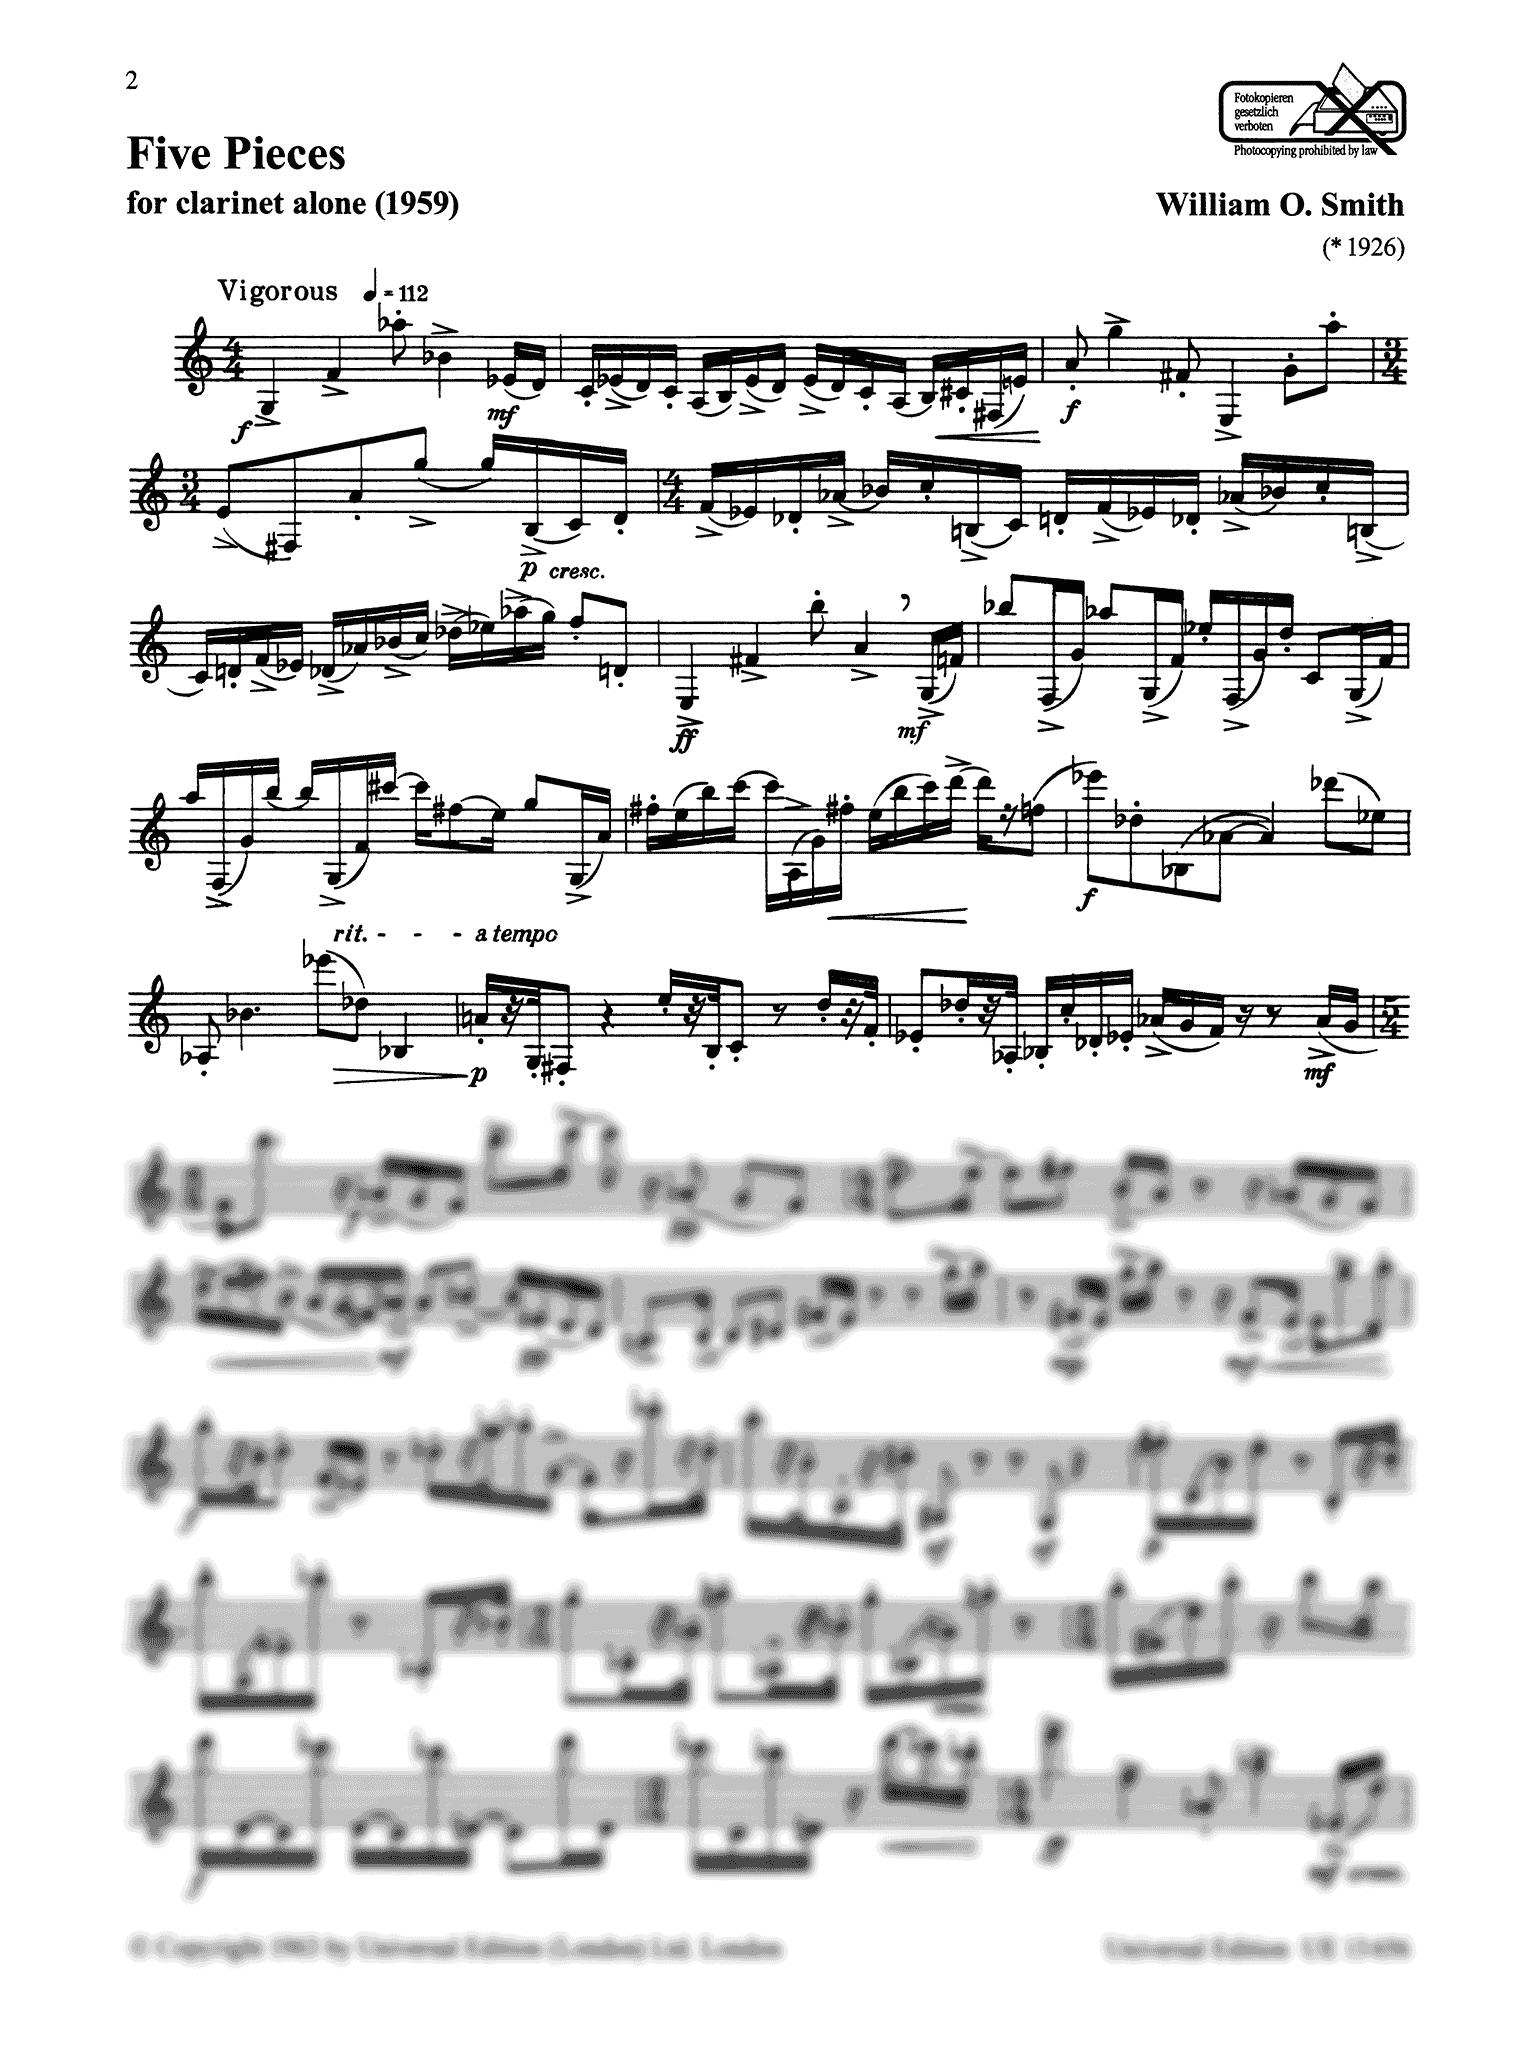 Five Pieces for clarinet alone - Movement 1